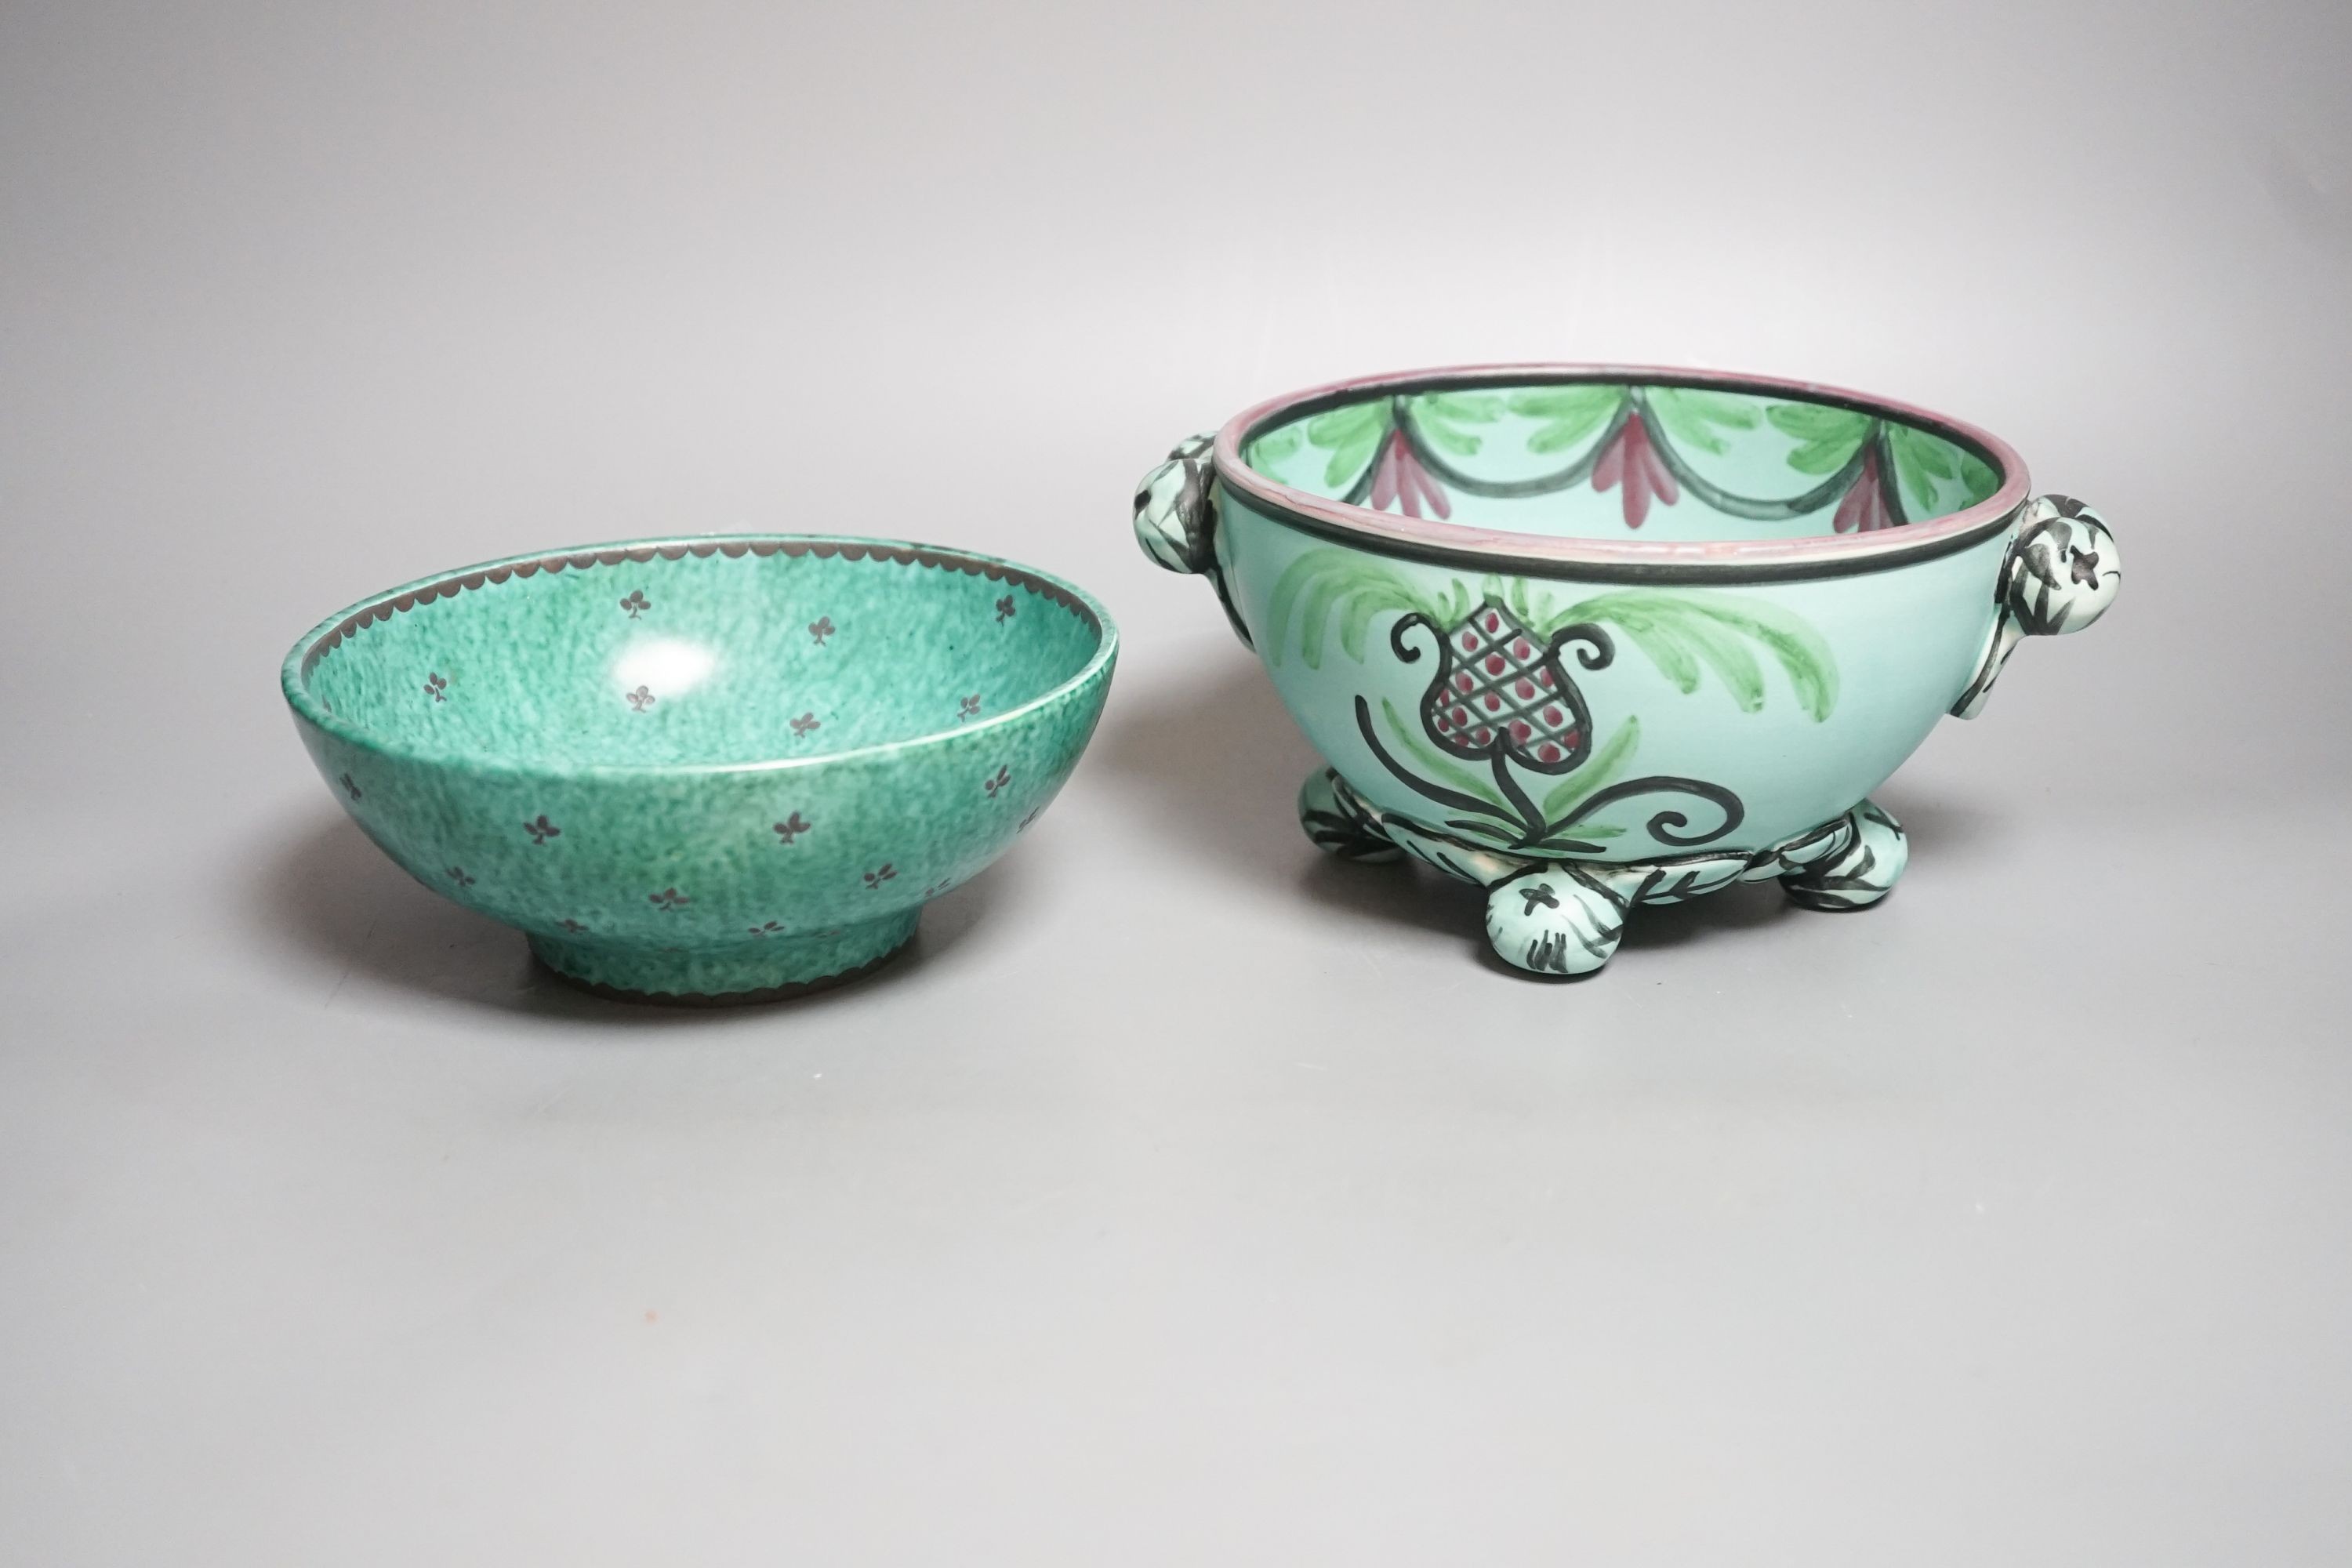 A Gustavsberg Argentaware bowl, designed by Wilhelm Kage and an Egersund two handled bowl 22cm